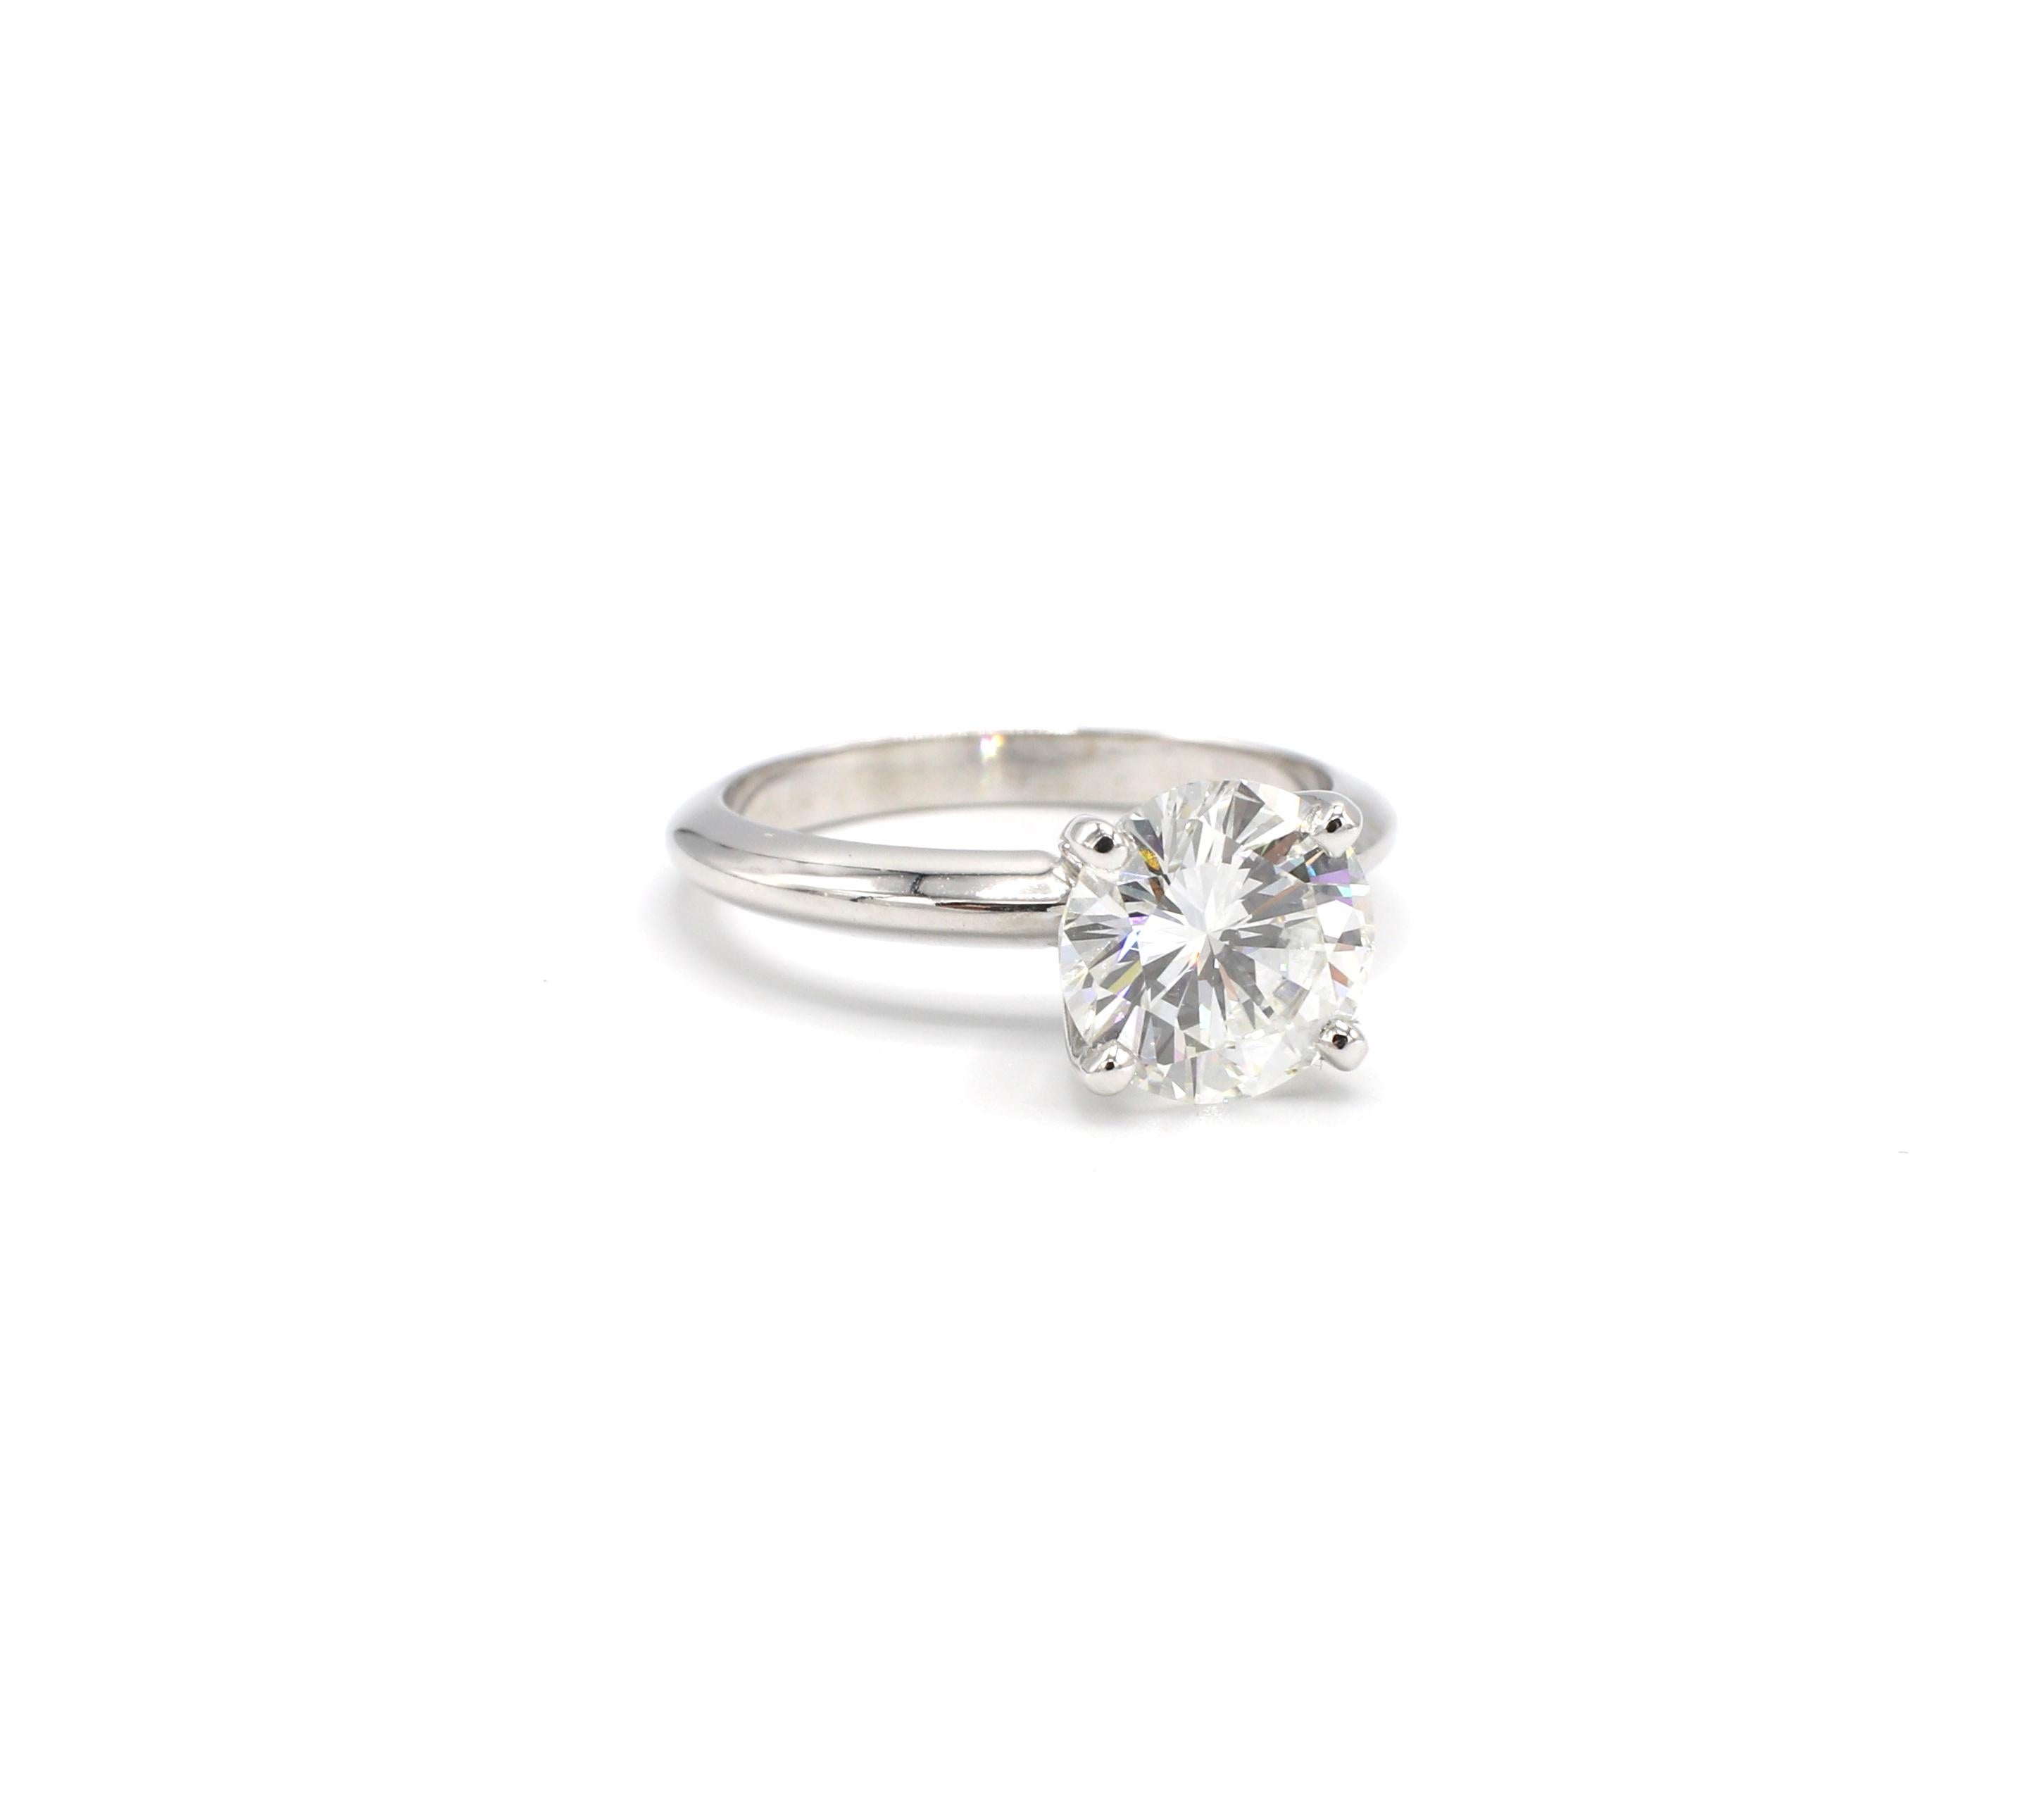 GIA Certified 2.15 Carat H SI2 Round Diamond Solitaire Engagement Ring 14K White Gold Size 6.25


GIA Report Number: 6214084904 (please note original GIA report pictured for details)
Diamond shape: Round brilliant
Carat weight: 2.15 carat
Color